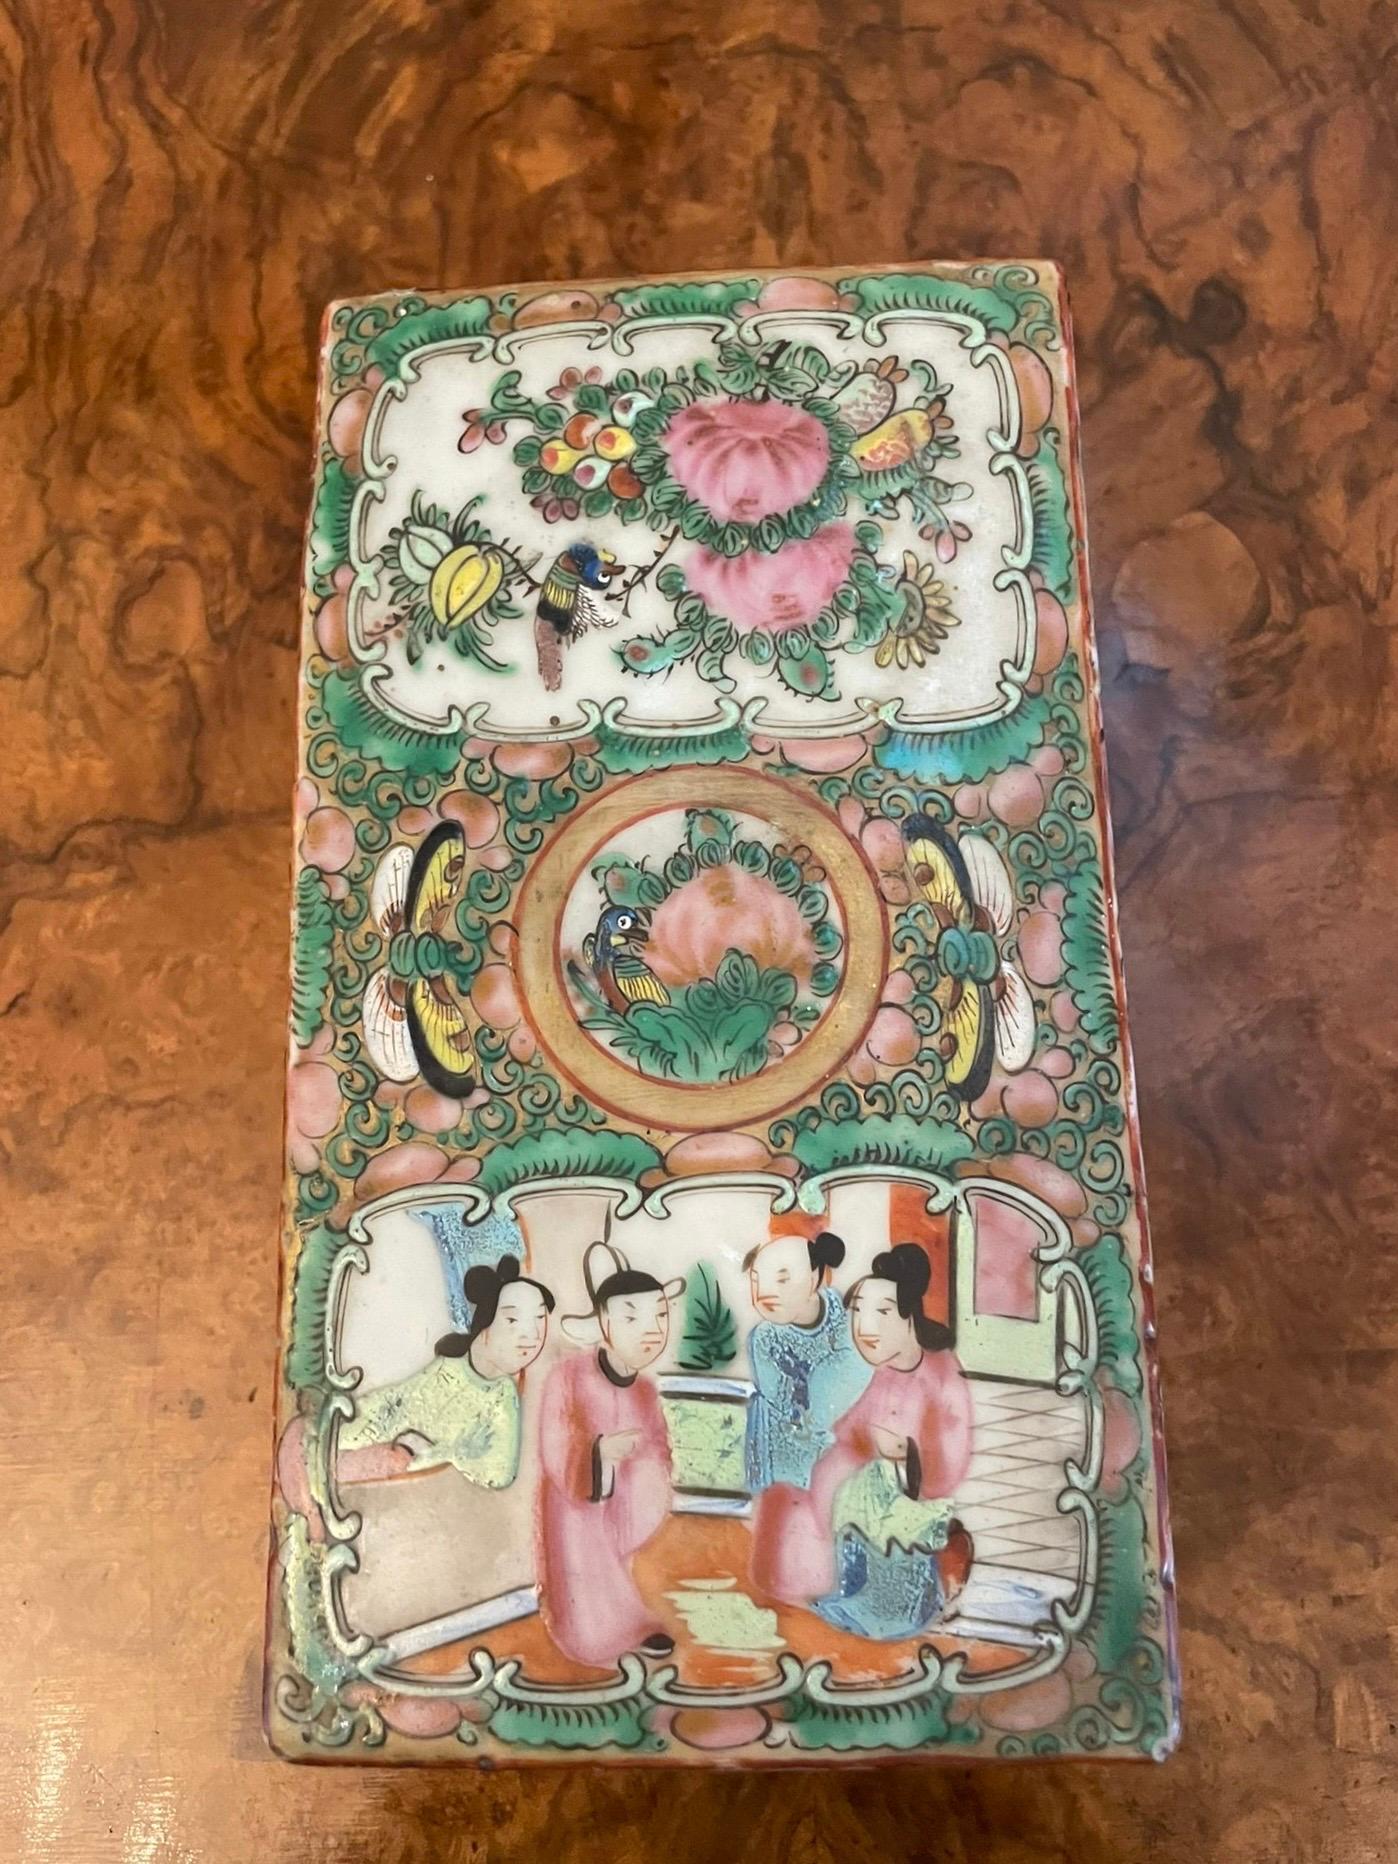 Antique 19th century quality Chinese Famille Rose Canton lidded pen box hand painted in the Famille Rosé taste depicting pheasants and butterflies in foliage and figures in a Chinese courtyard scene. The panels are framed with dense borders of